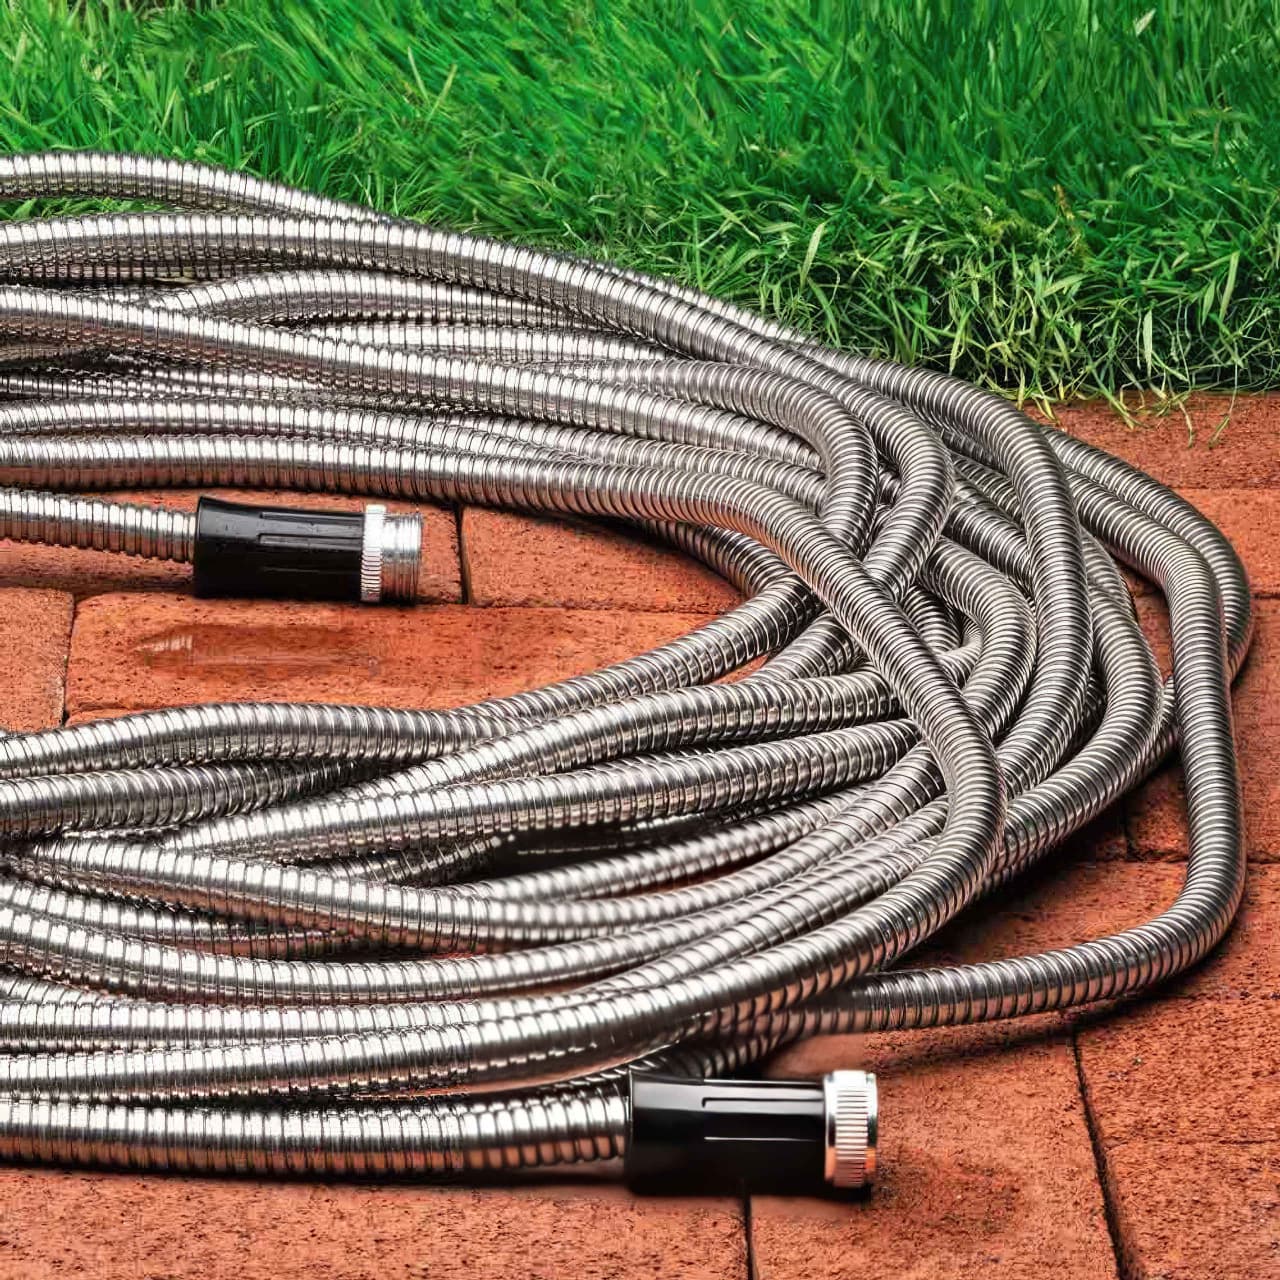 8 Best Garden Hoses, According to Plant Experts - Buy Side from WSJ